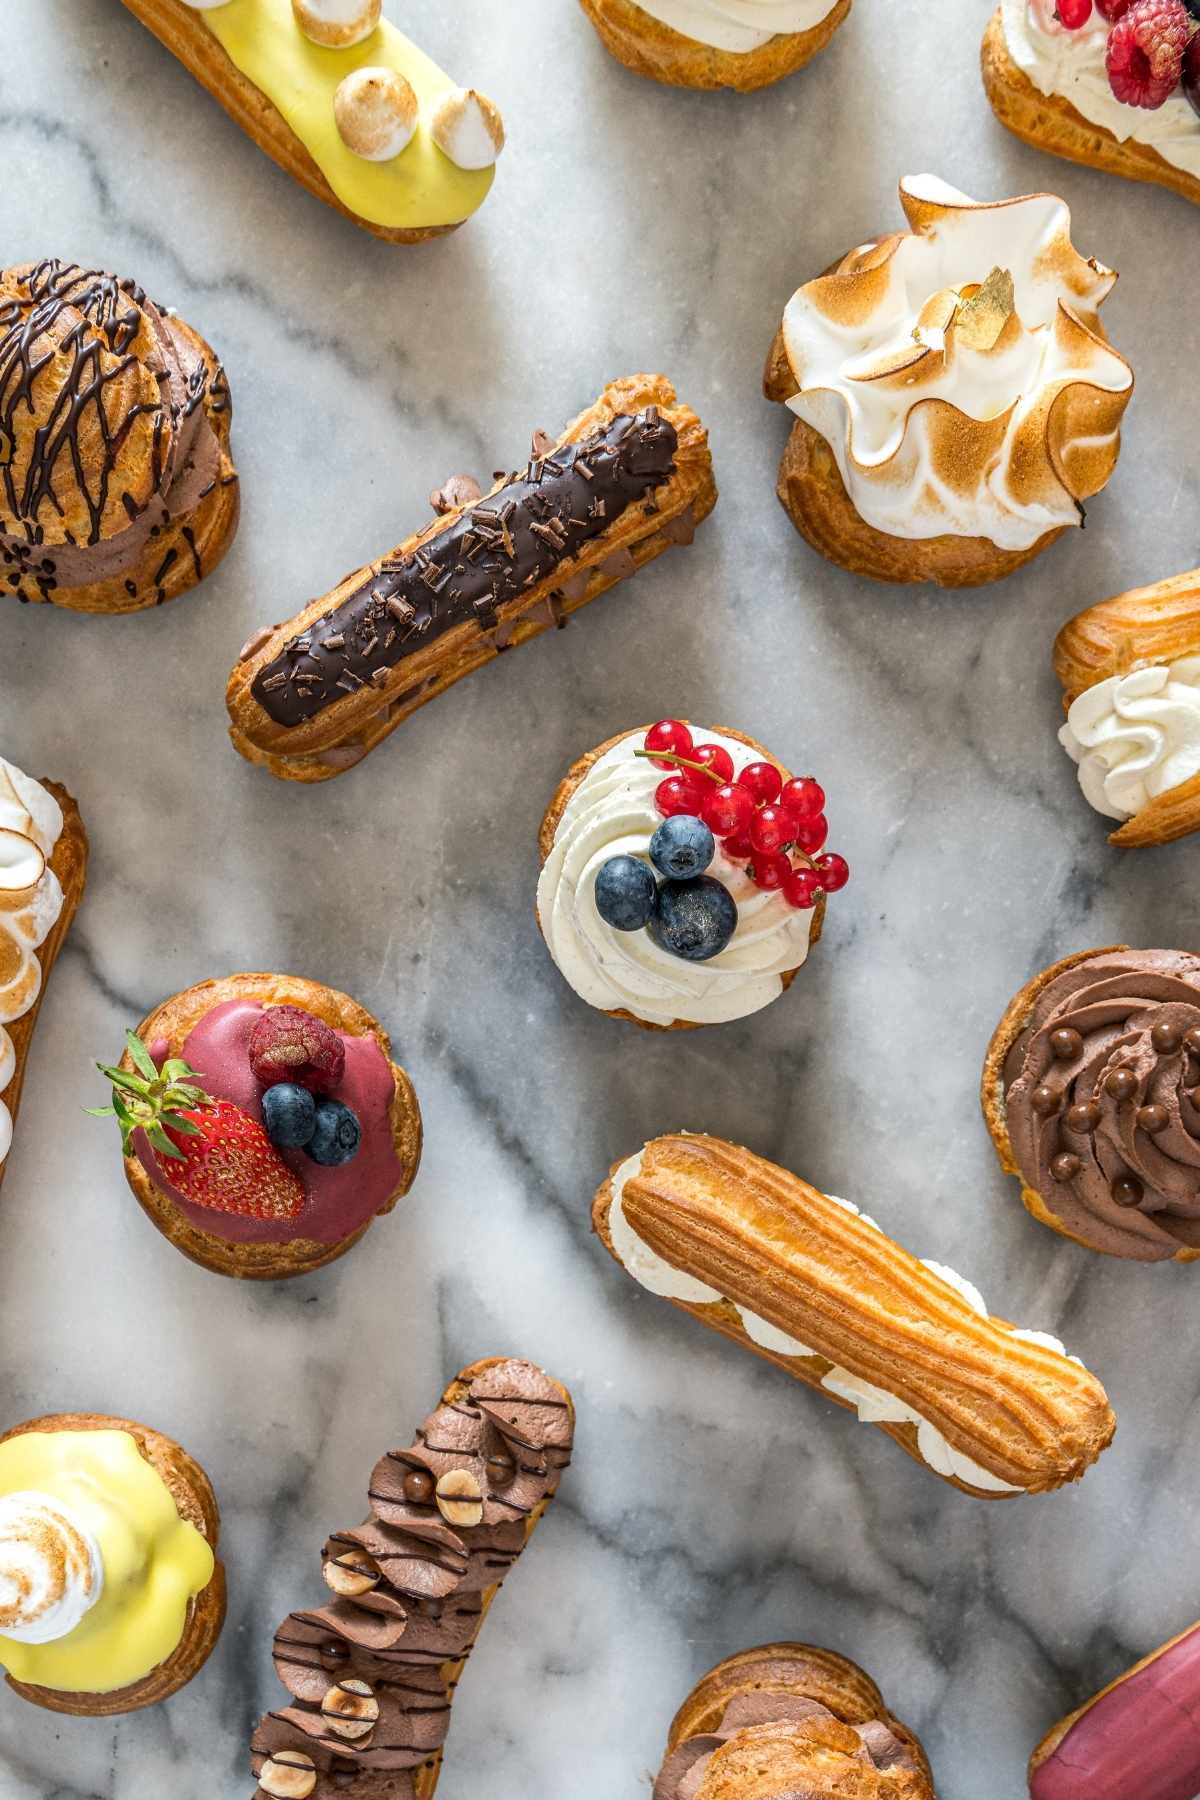 A whole pastry case worth of delights on a marble table top.